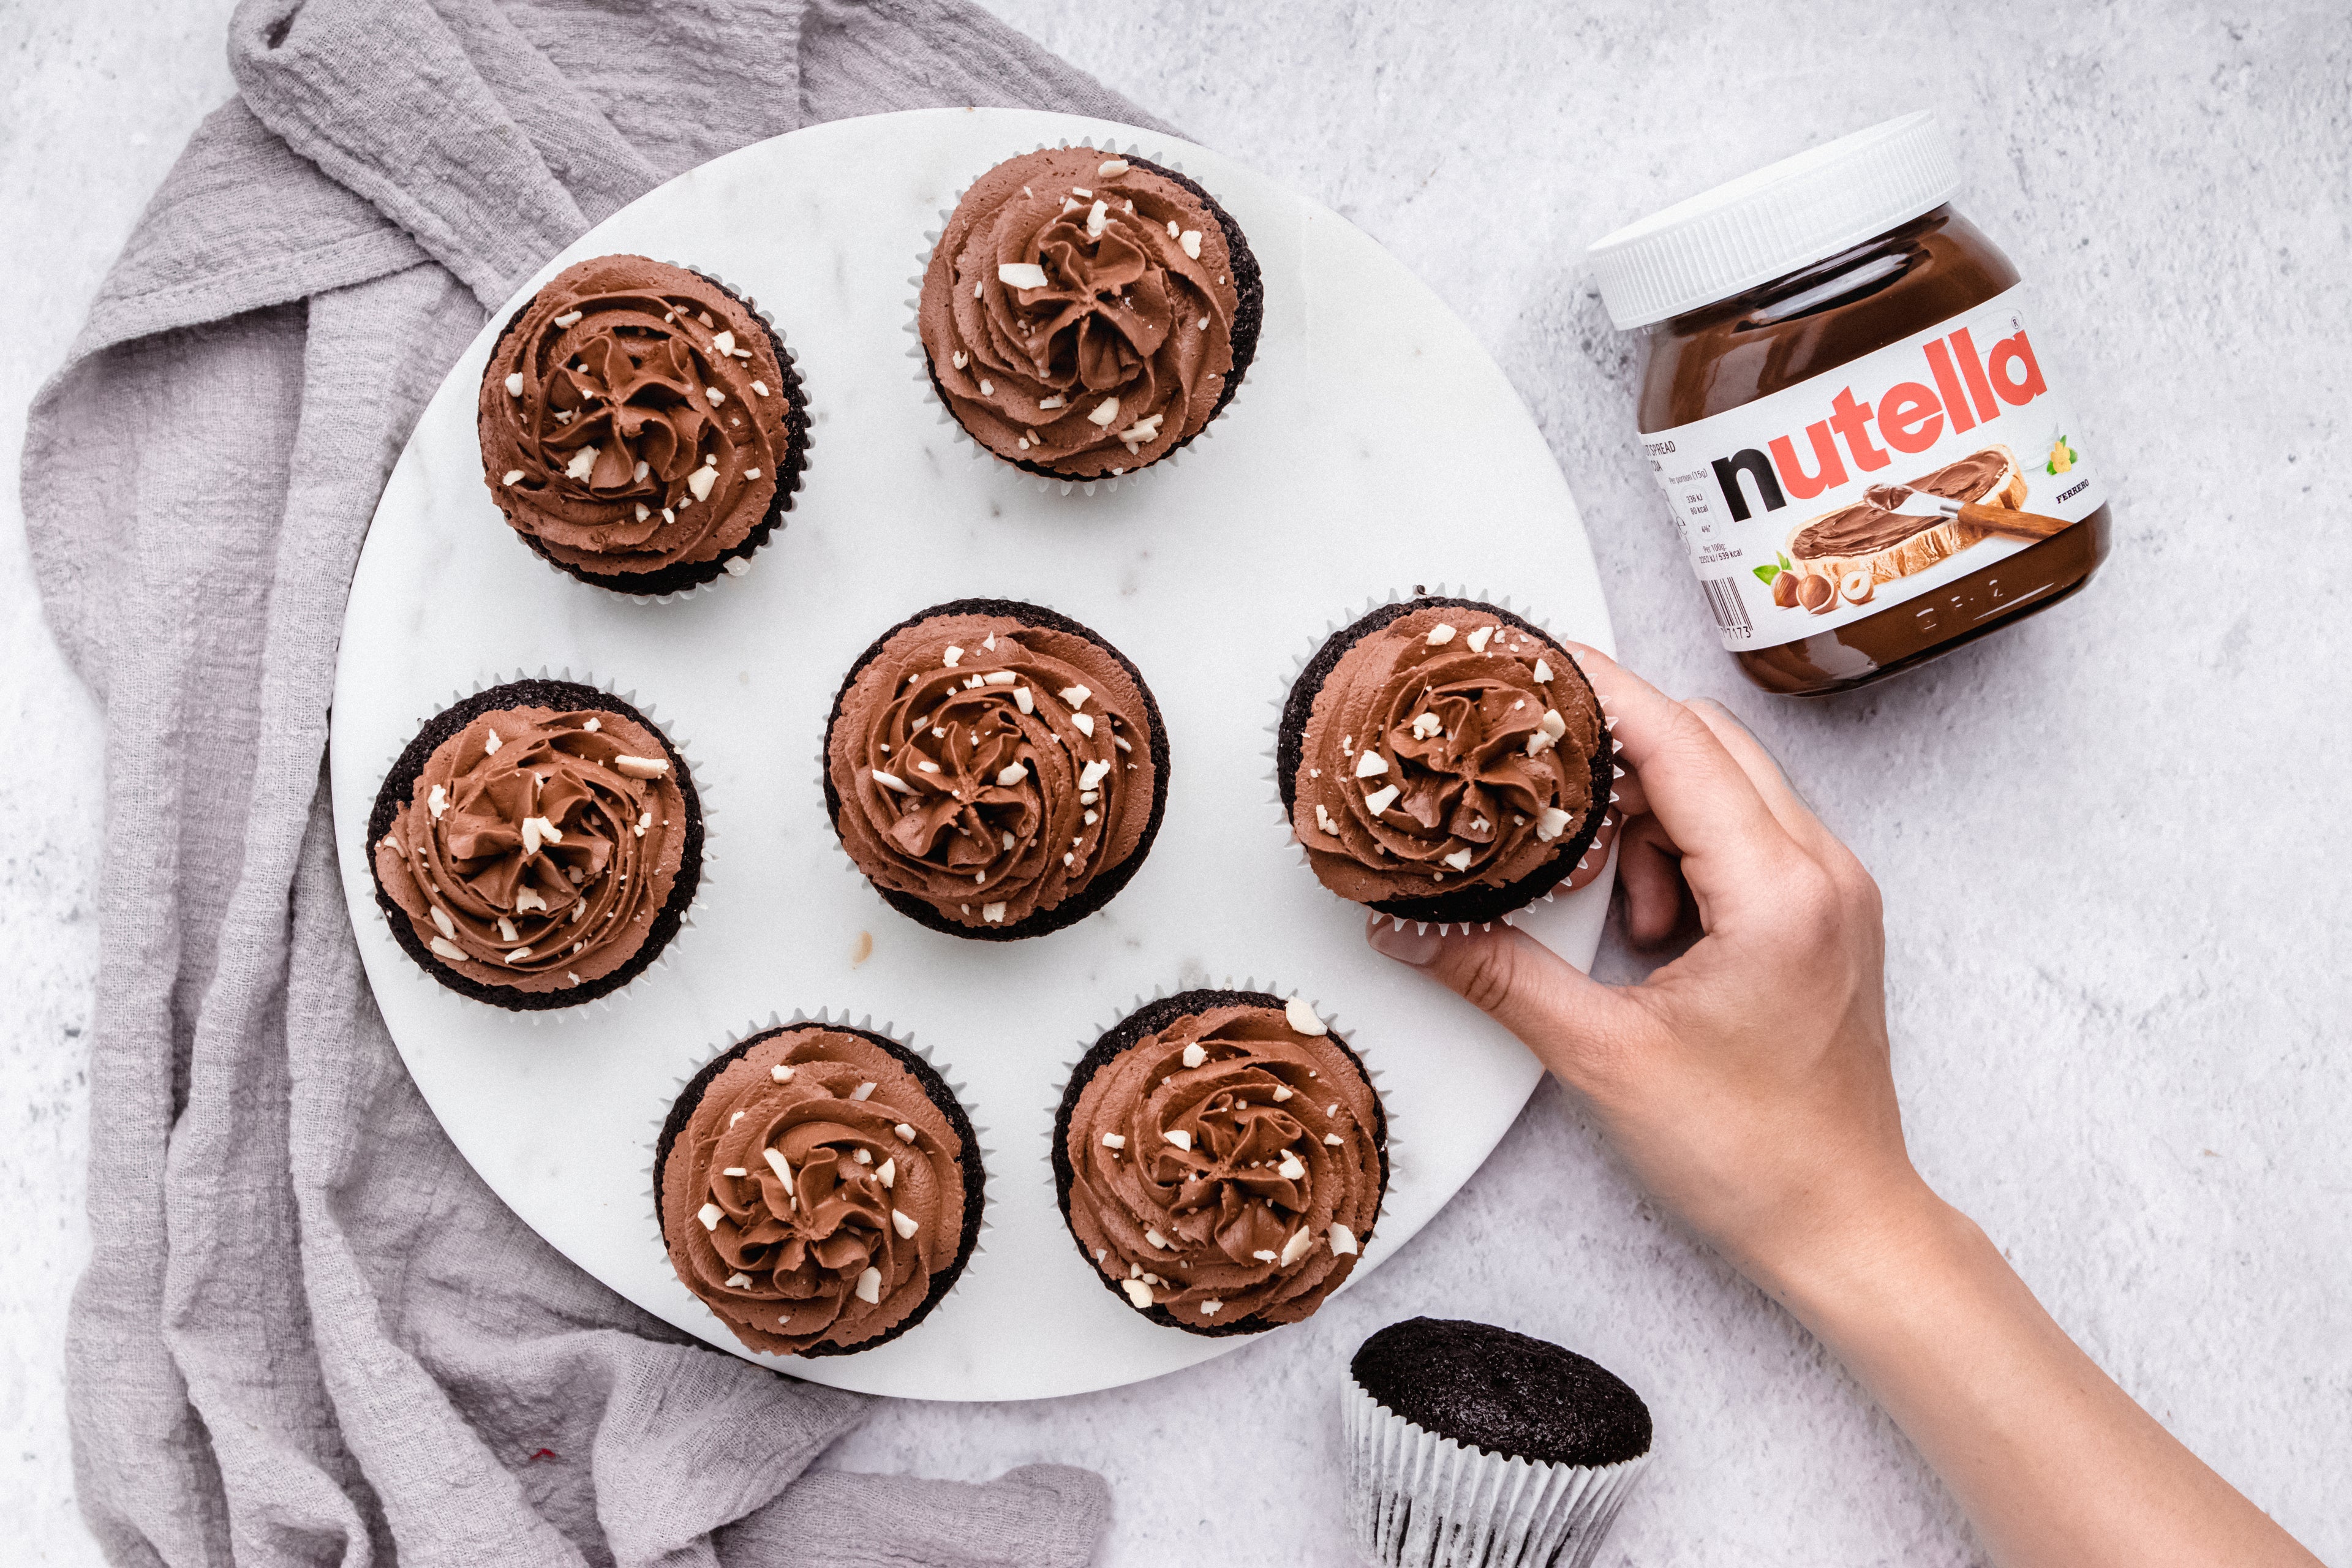 Nutella Cupcakes from above, with hand holding a cupcake next to a jar of Nutella